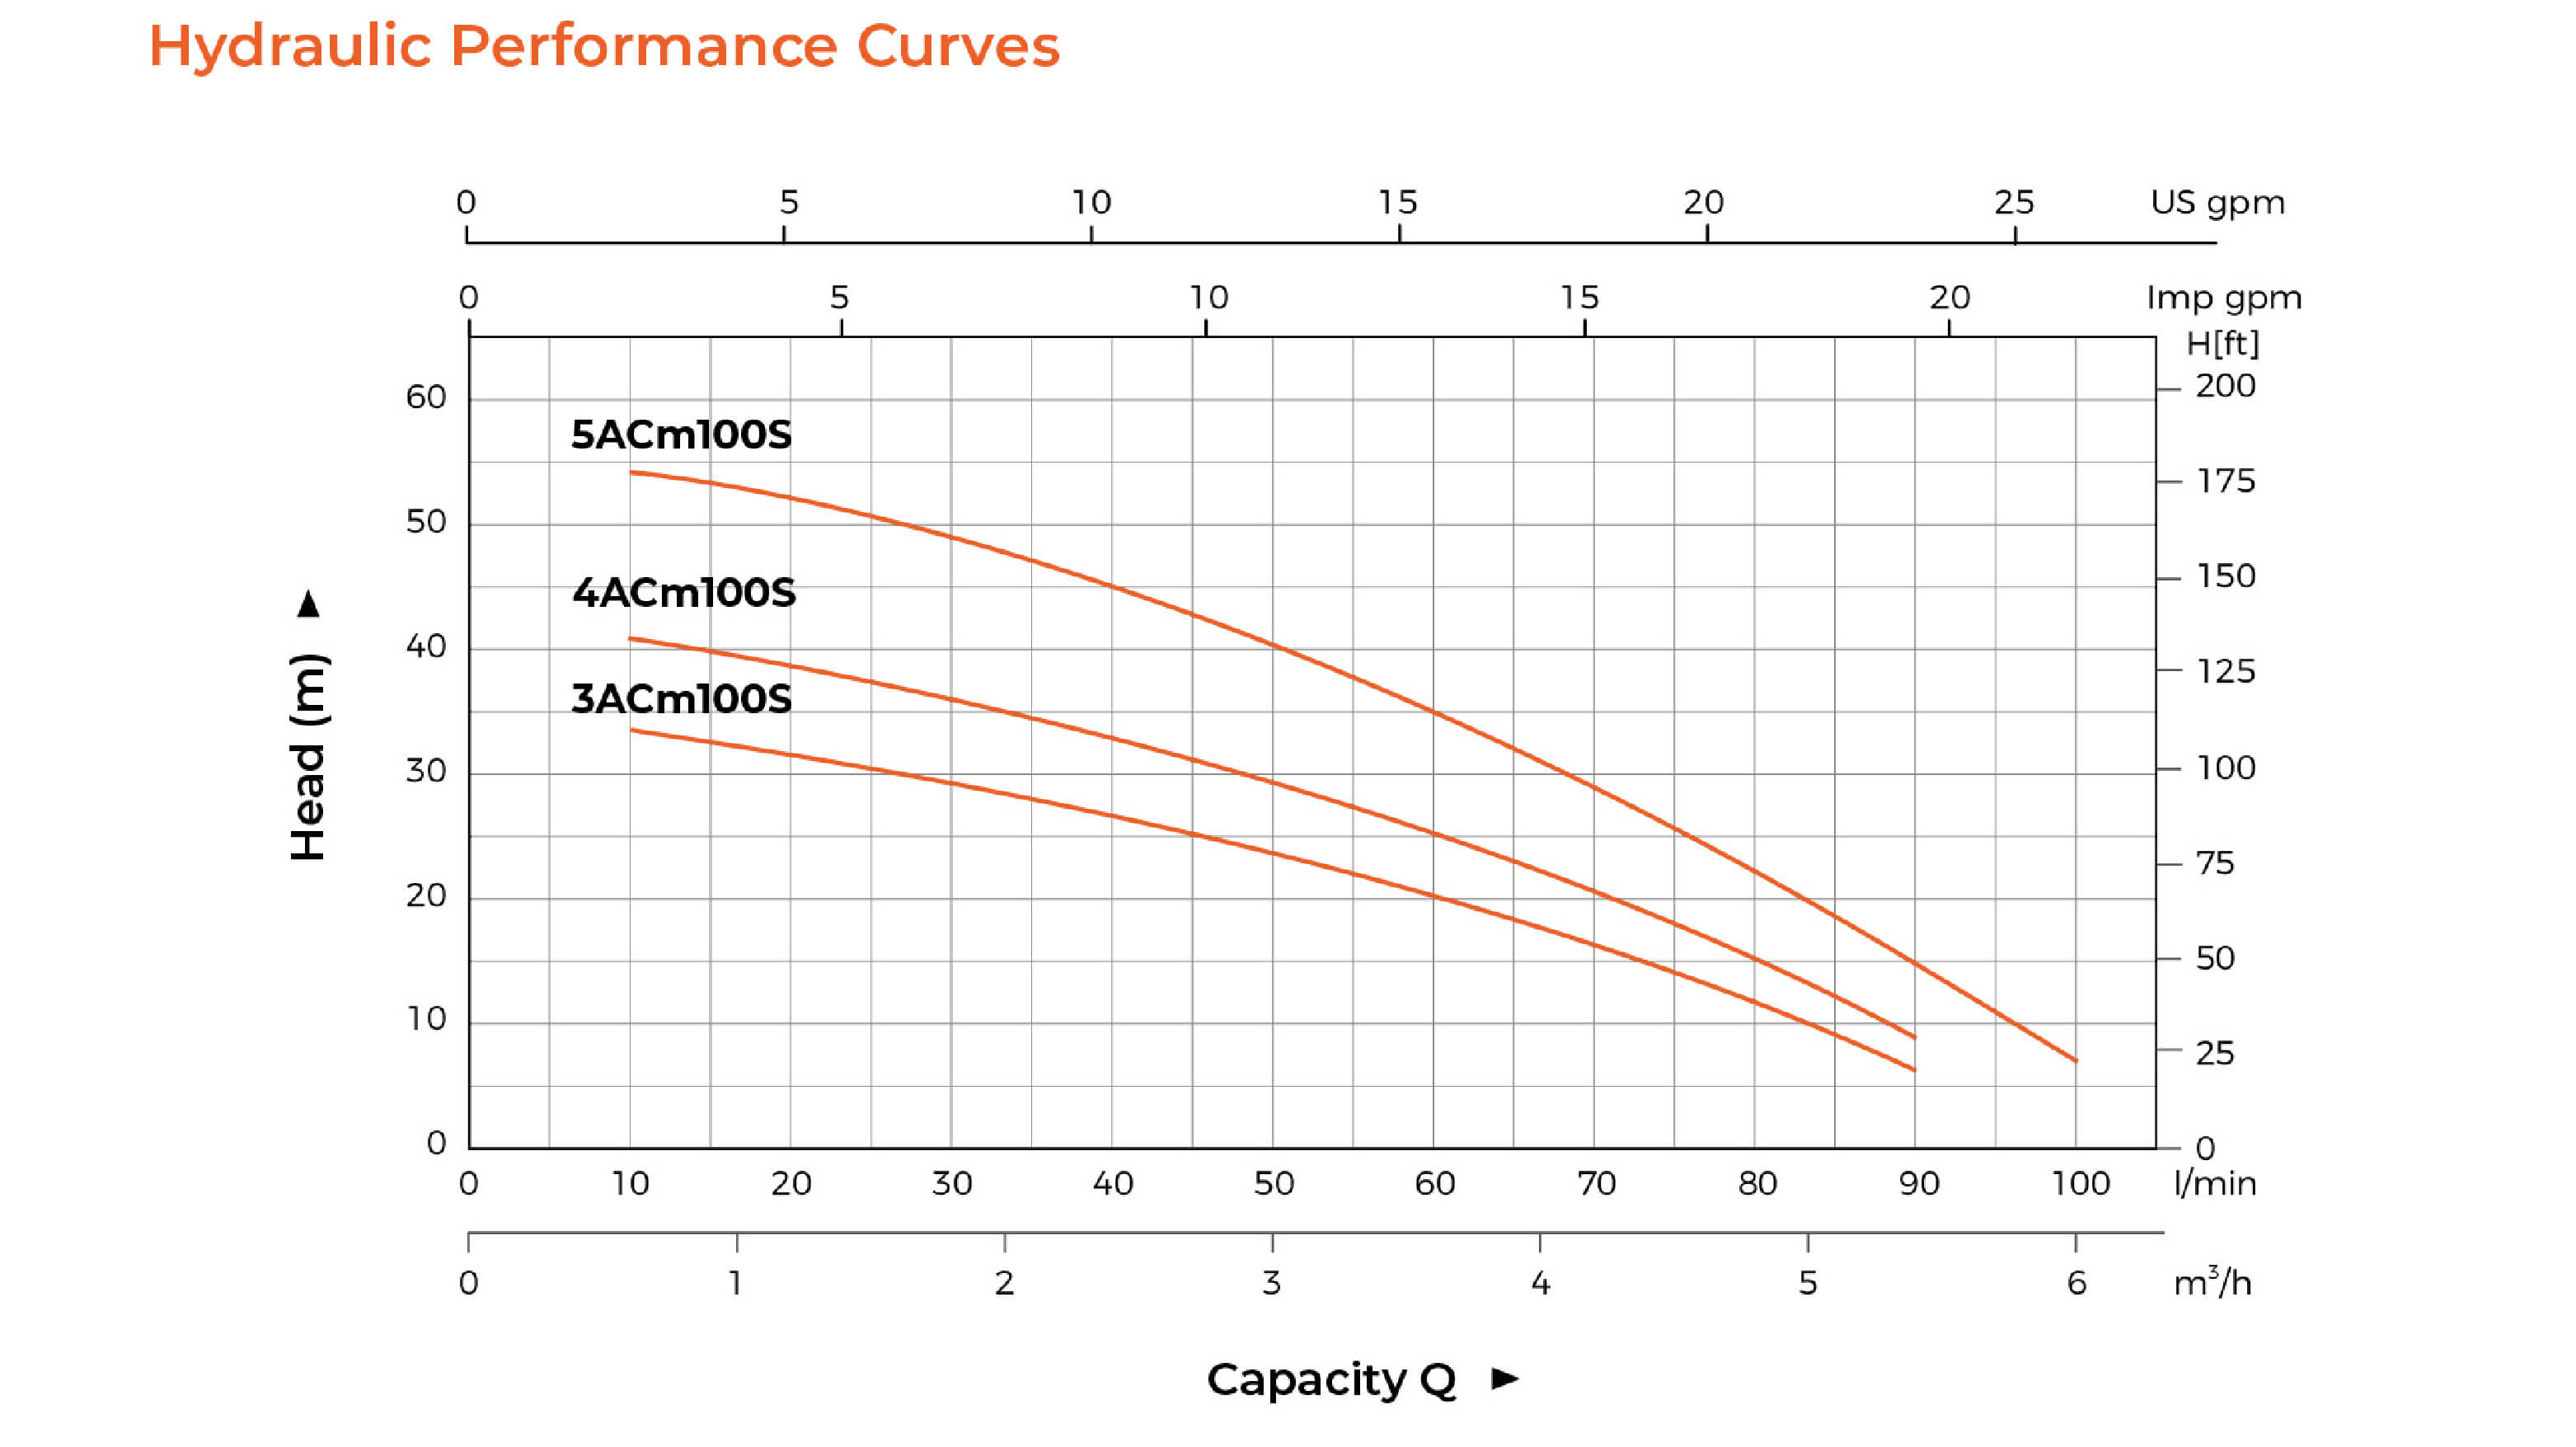 ACm-S Stainless Steel Multistage Centrifugal Pump Hydraulic Performance Curves